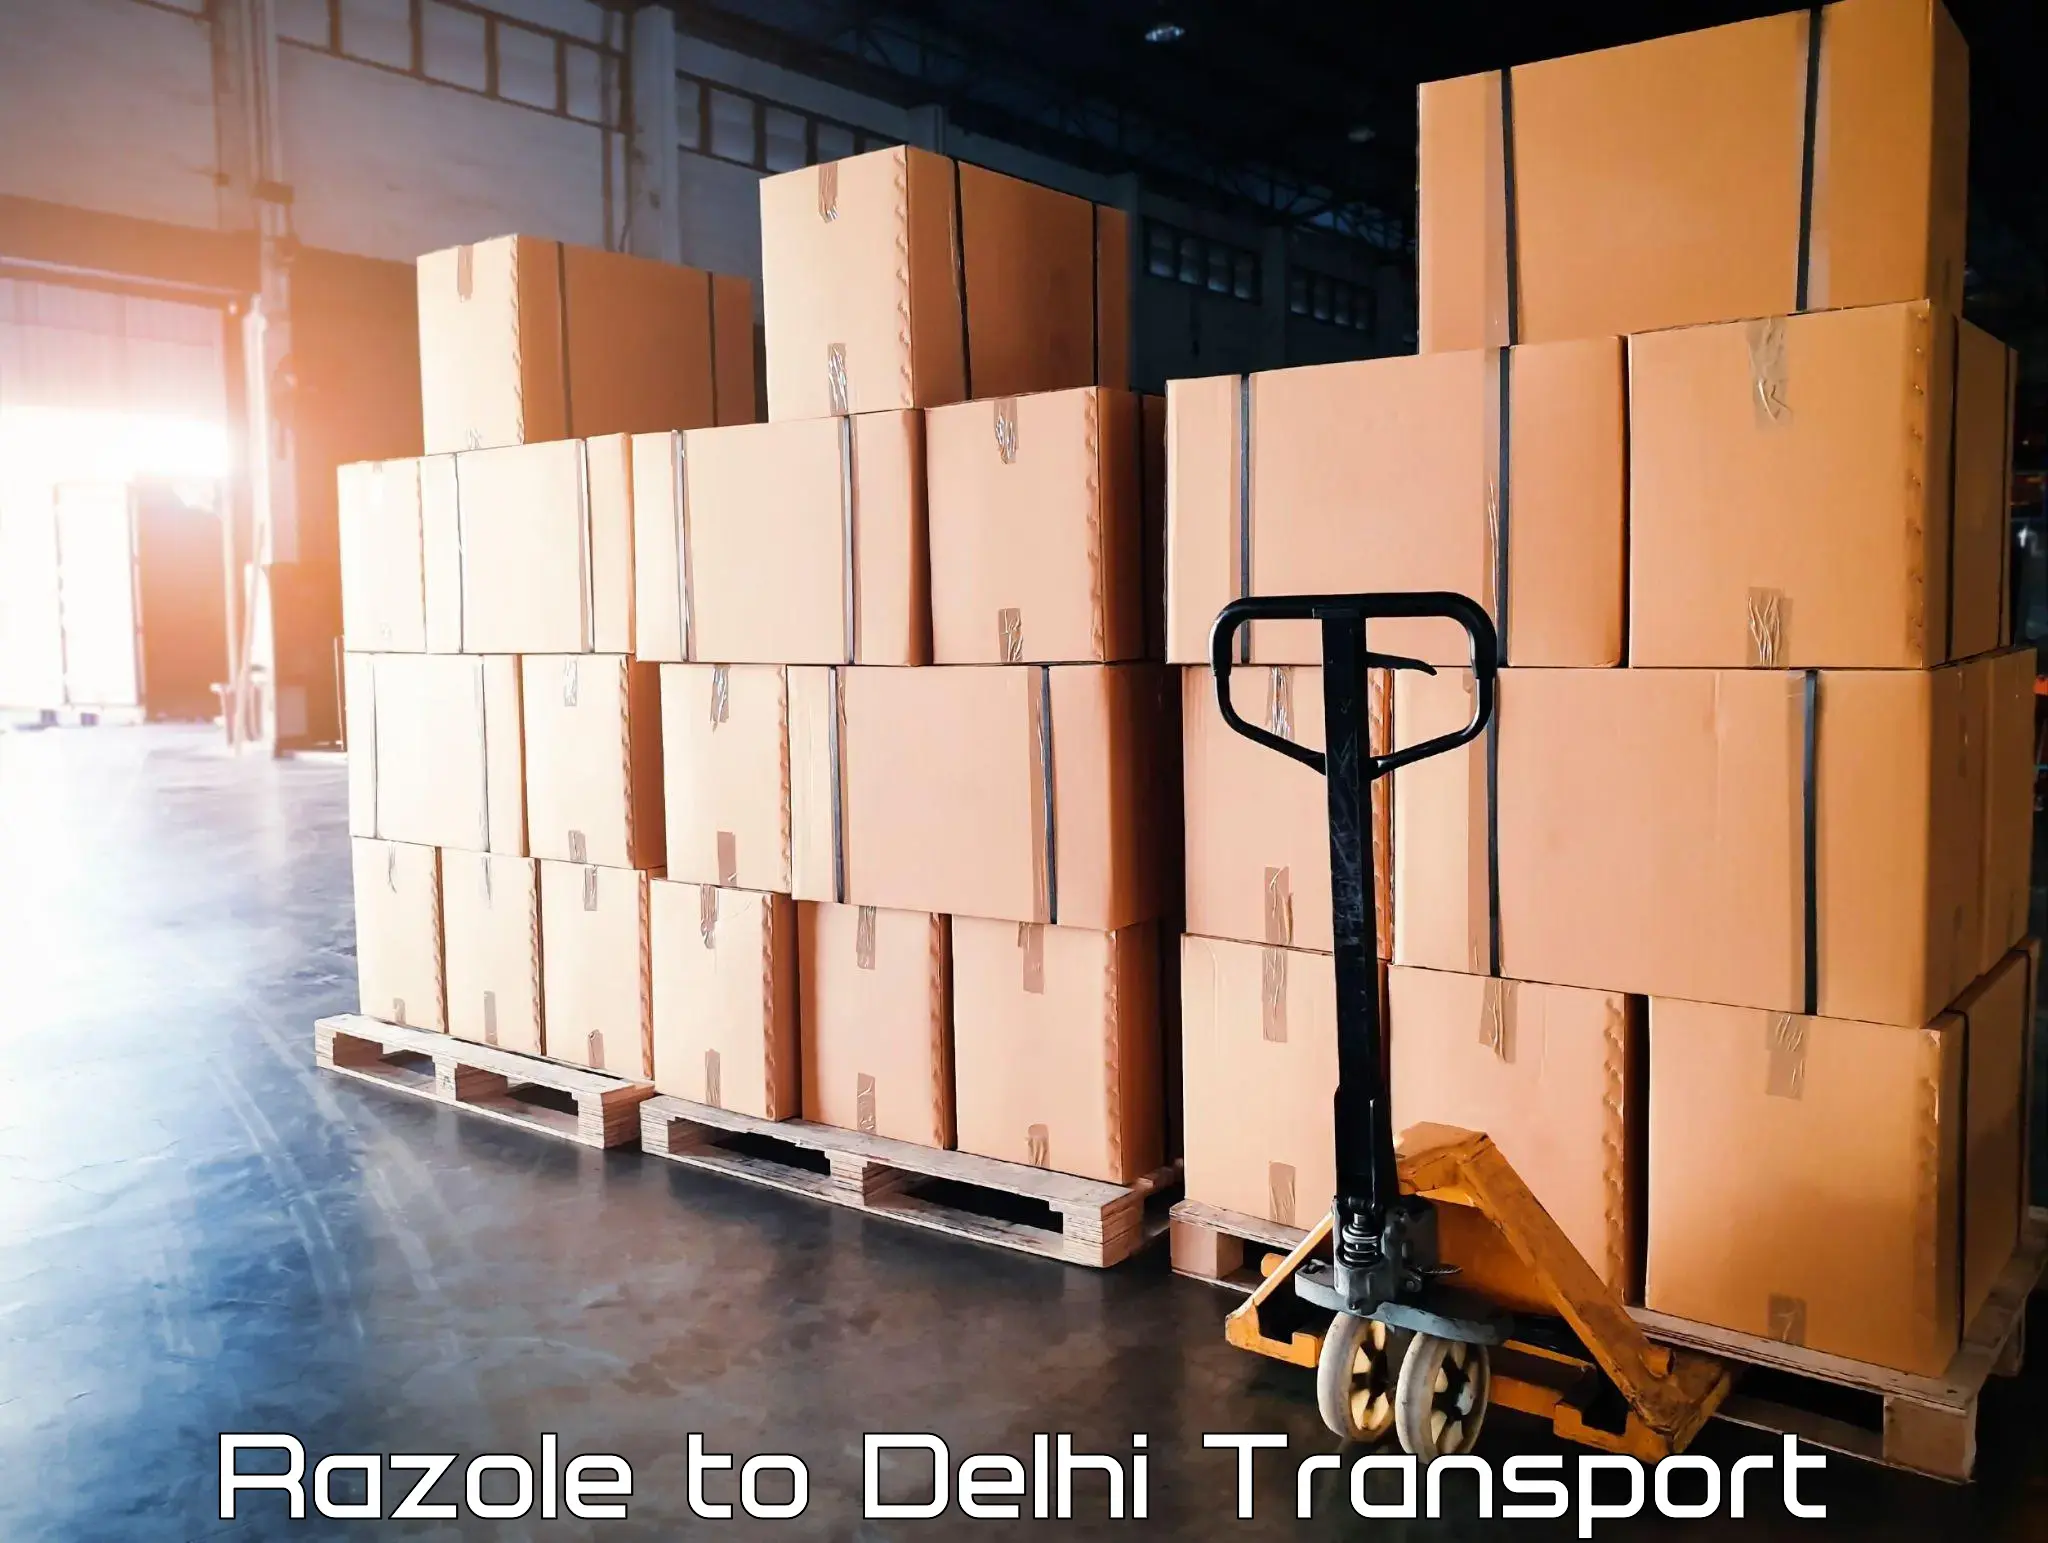 Daily parcel service transport in Razole to NCR